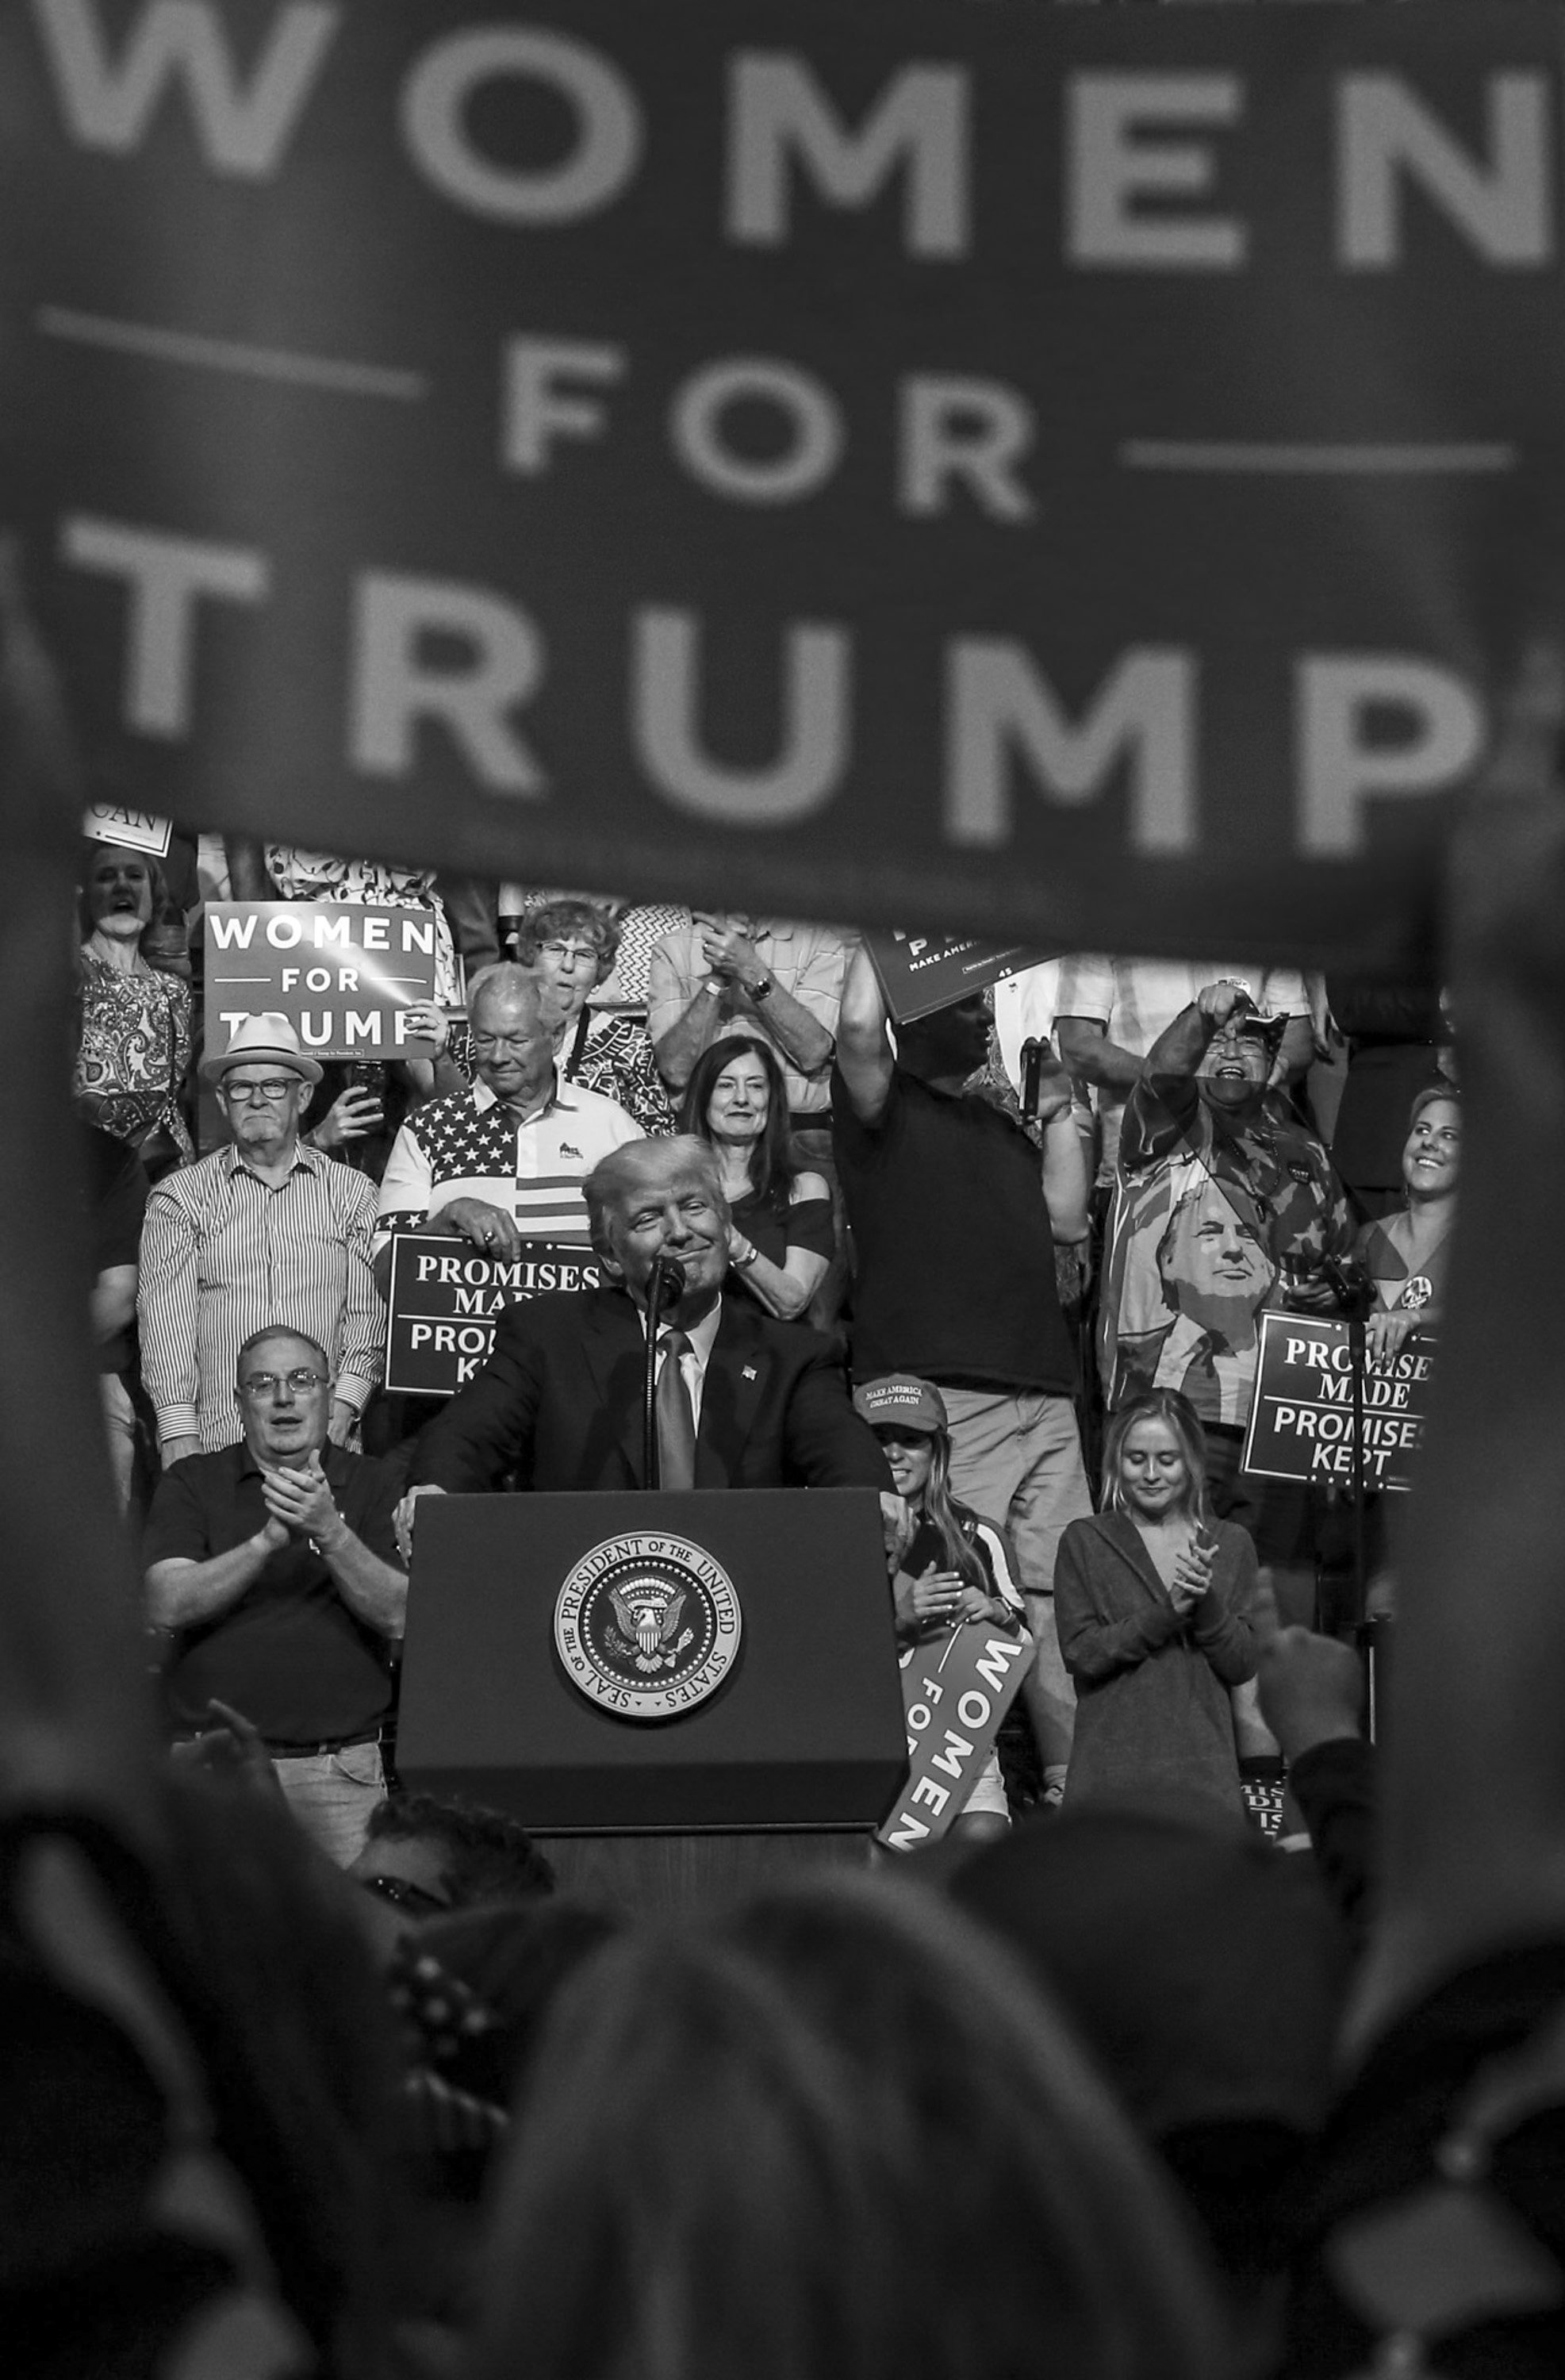  President Donald Trump speaks to supporters at a campaign rally at the U.S. Cellular Center in Cedar Rapids, Iowa, Wednesday.  